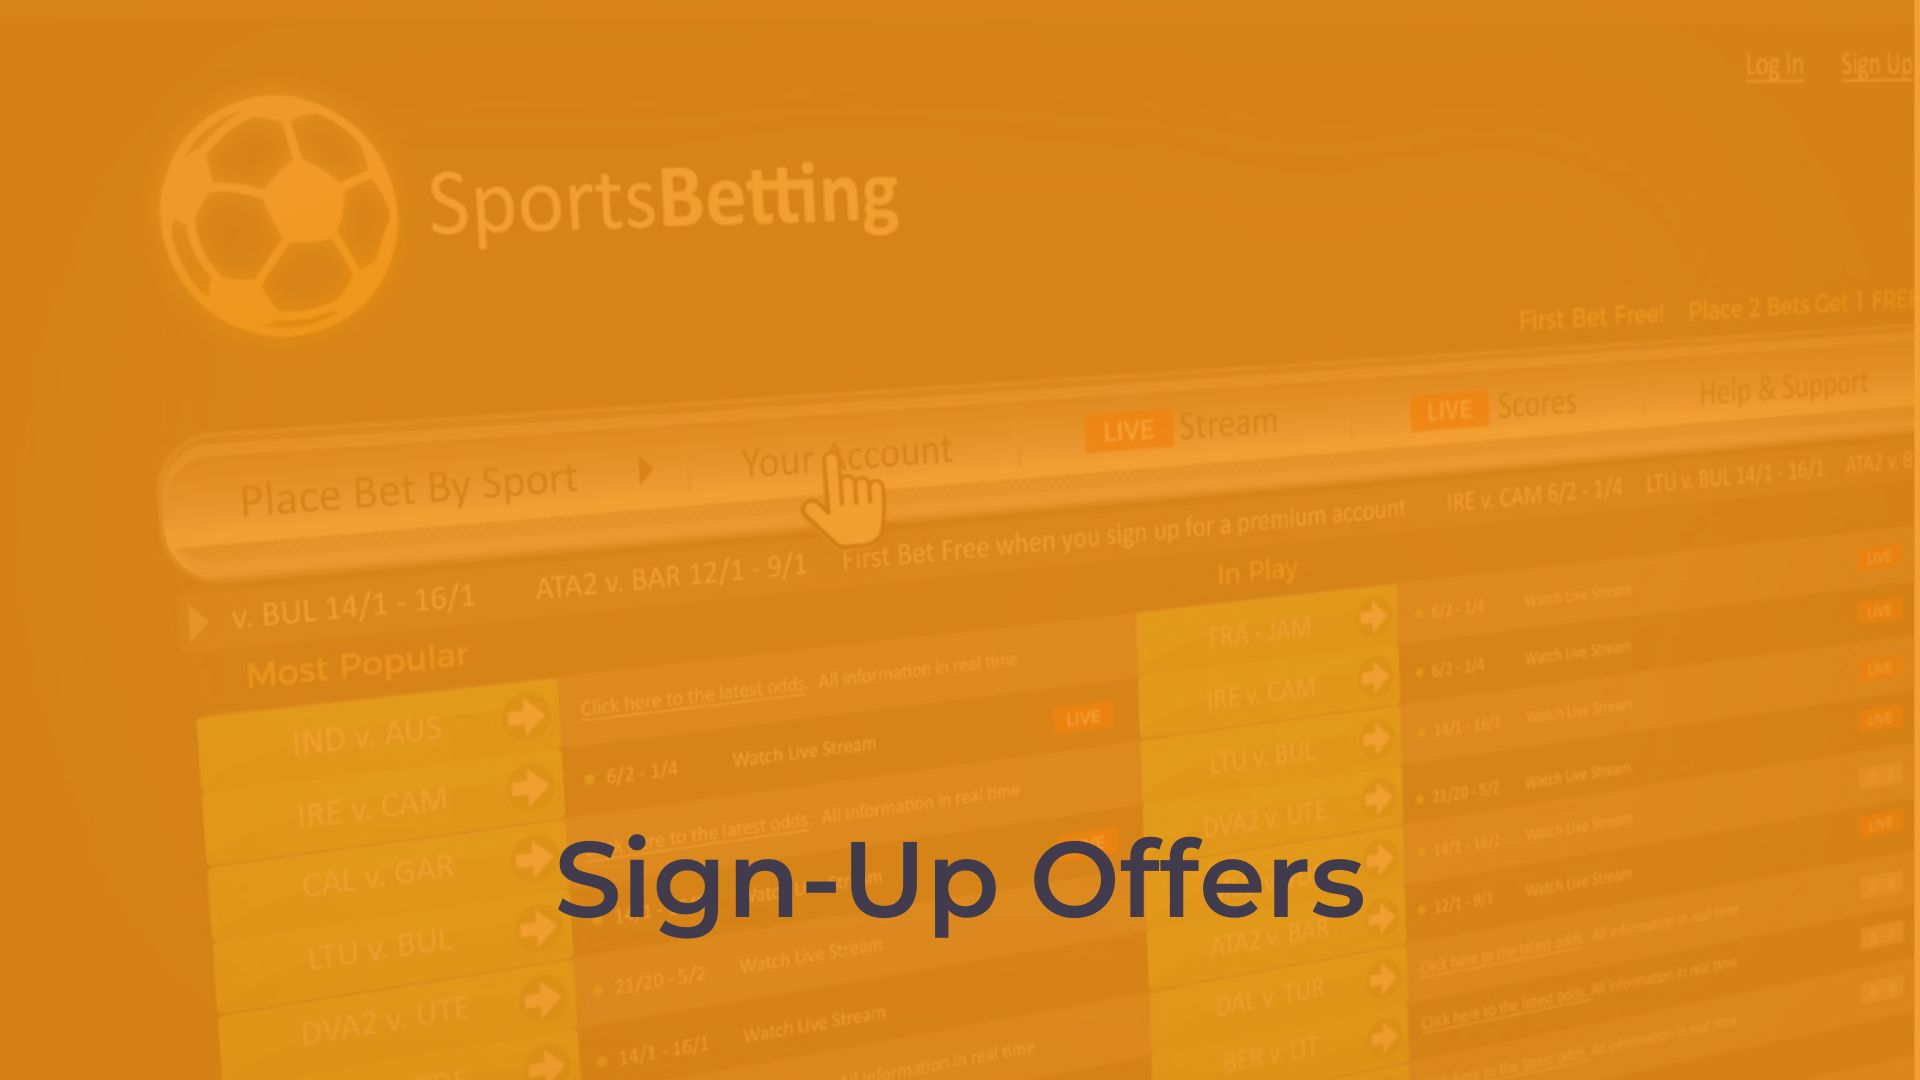 Sign-Up Offers from Indian Bookmakers: A Closer Look